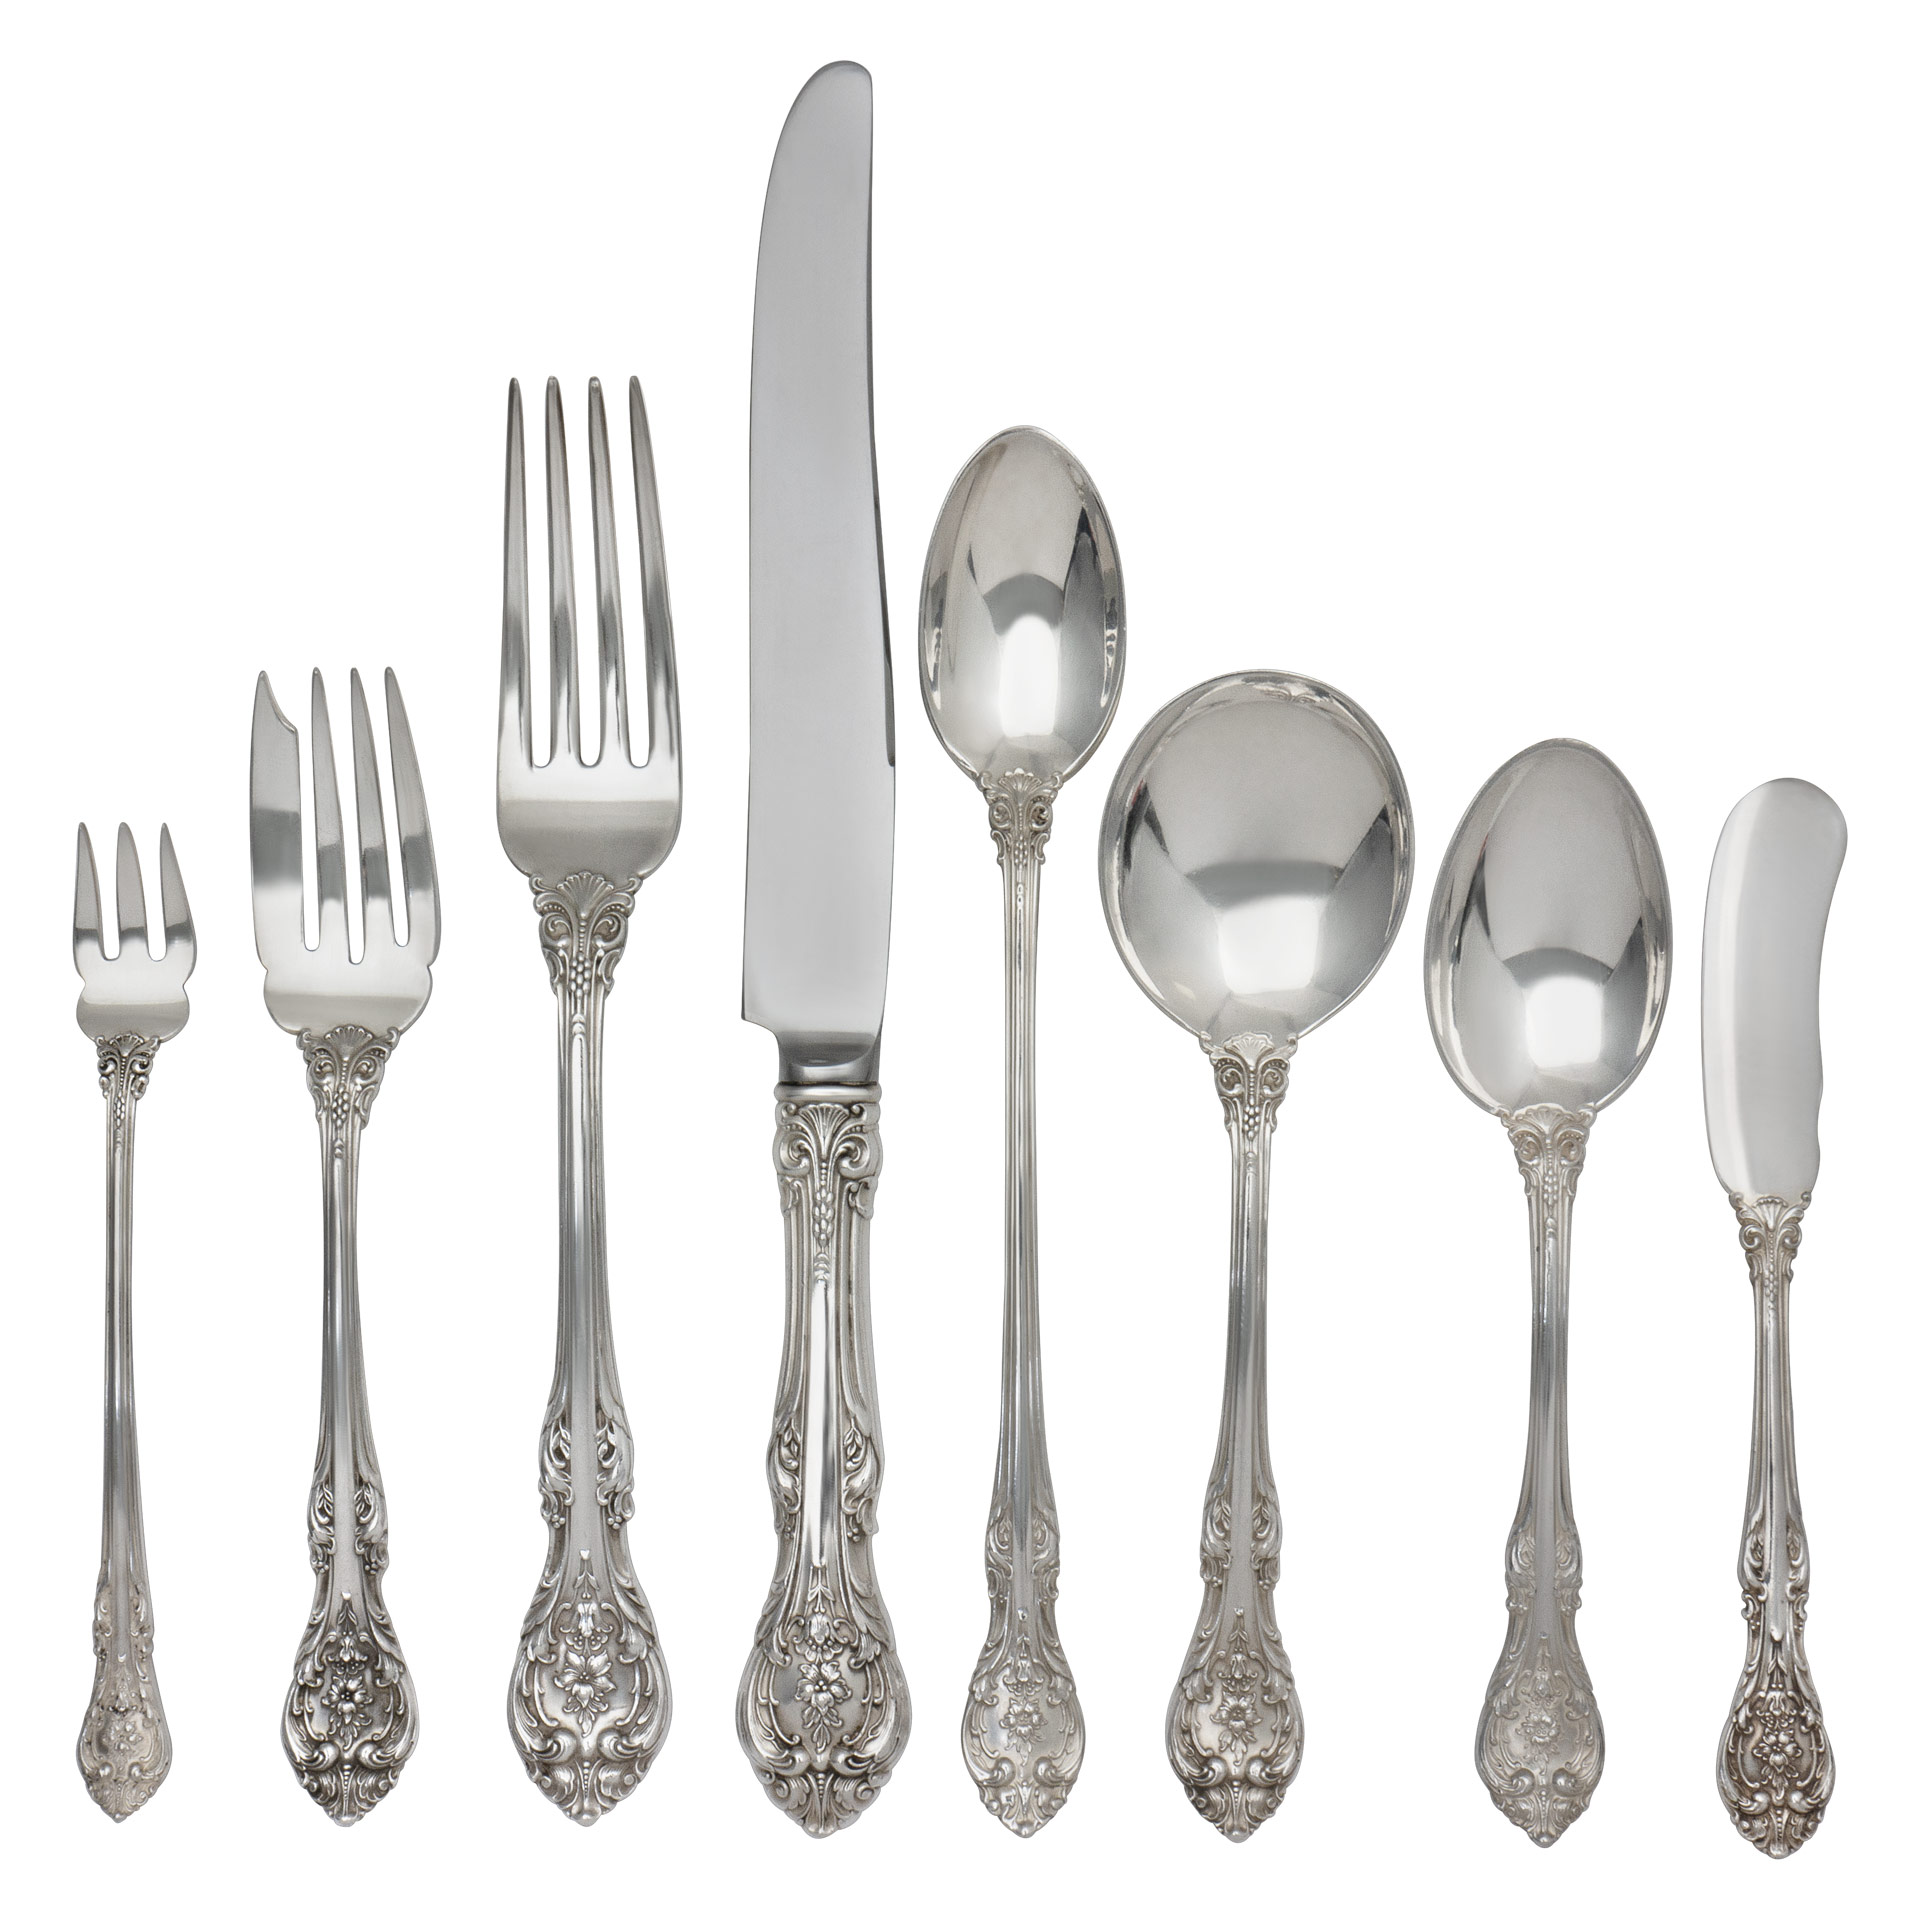 KING EDWARD Sterling Silver Flatware set patented in 1936 by Gorham- 8 Place setting for 10 + 5 Serving Pieces. Over 4100 grams sterling silver. image 1